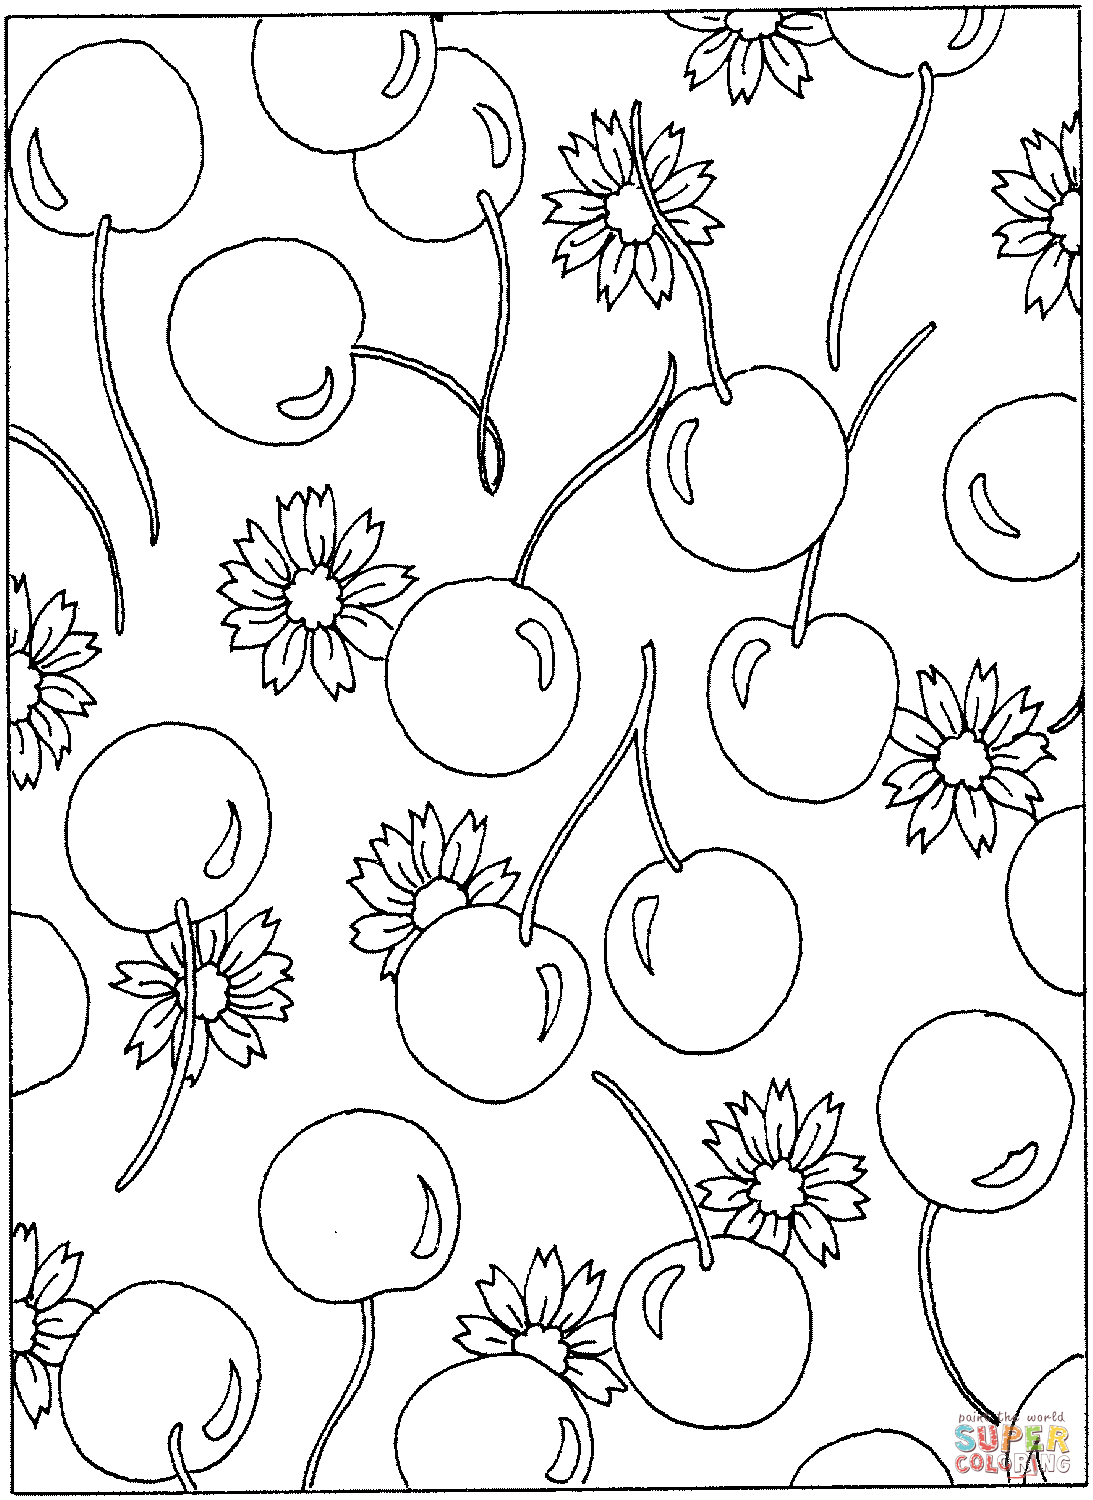 Download Cherry Blossom Coloring Page - Coloring Home